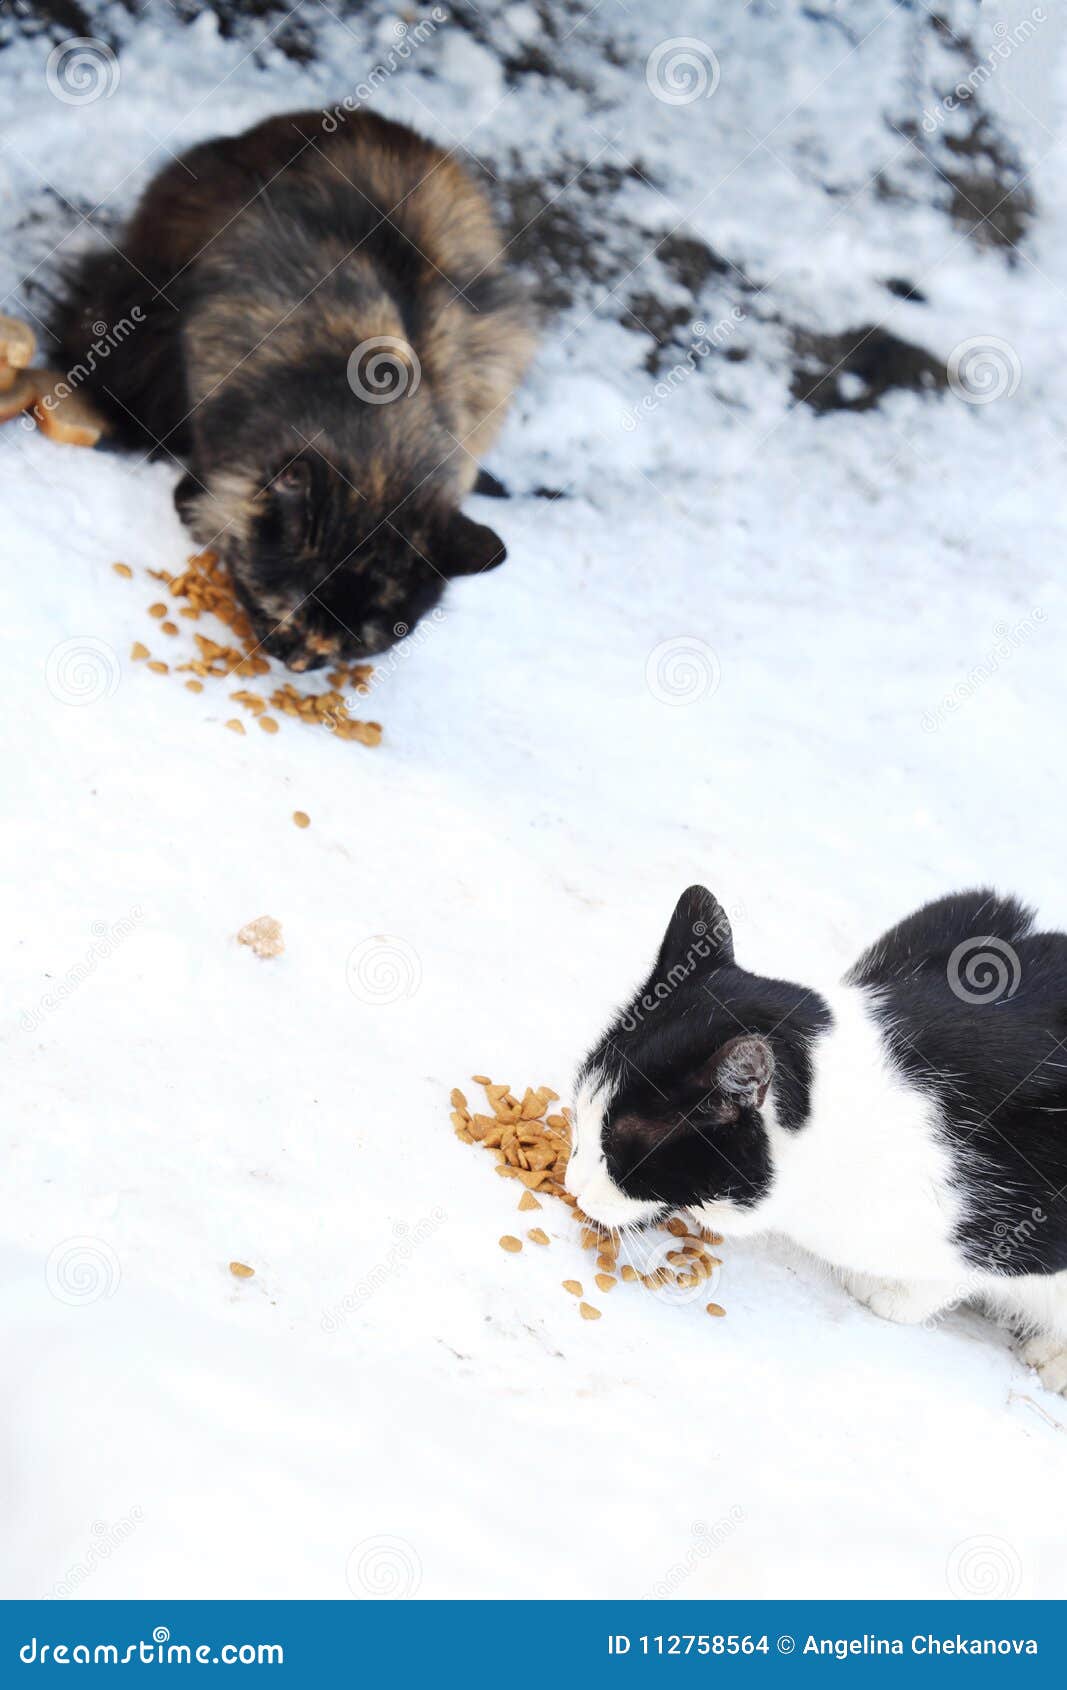 Stray Cats Eat On The Street Food In Winter Stock Photo Image of